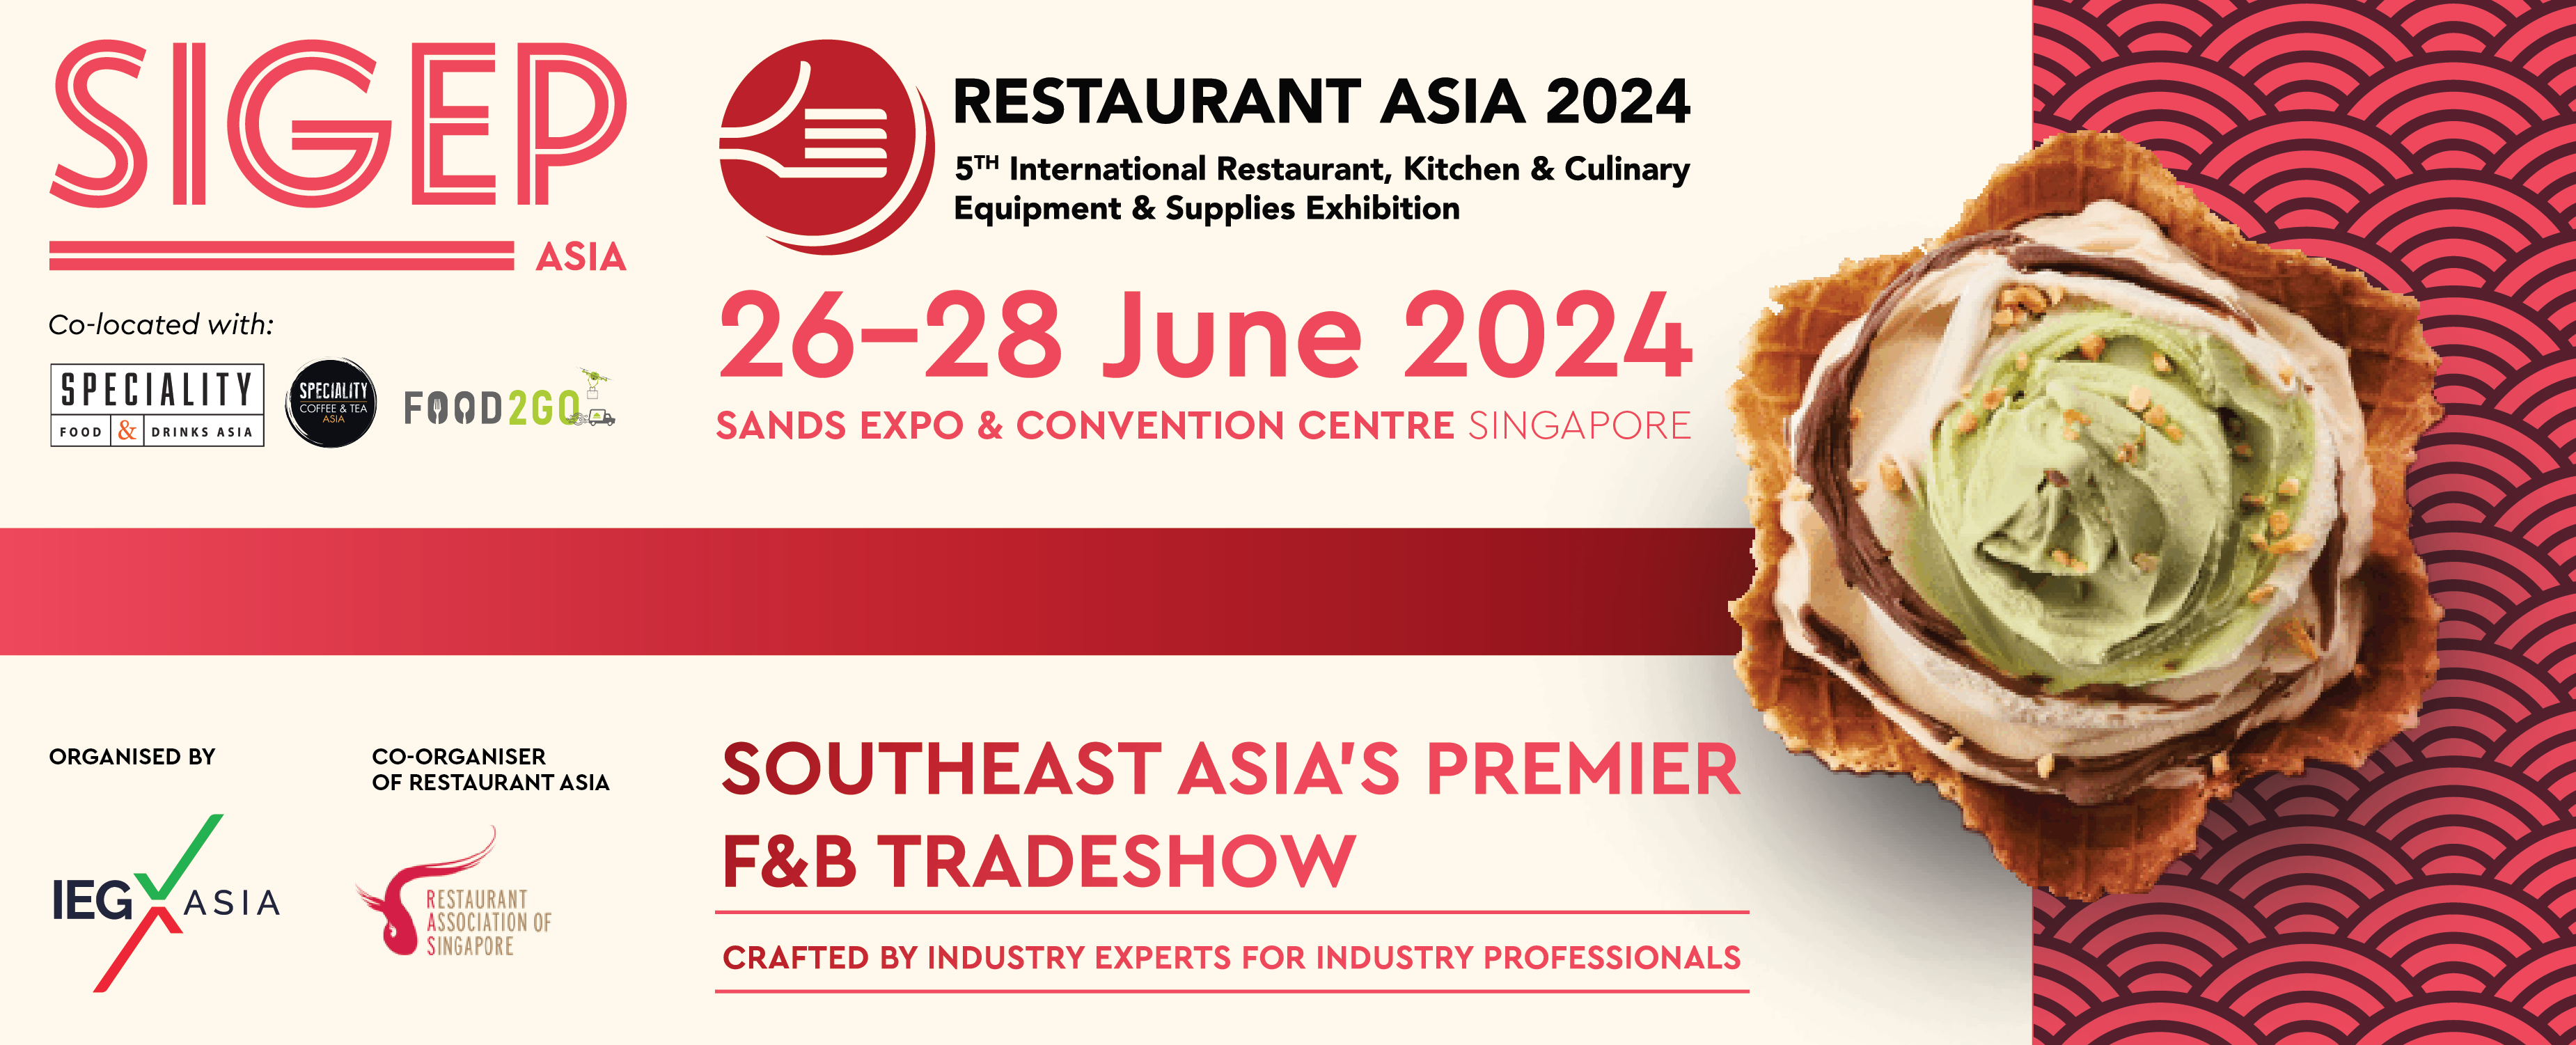 SIGEP and Restaurant Asia Co-located with Speciality Food & Drinks Asia, Speciality Coffee and Tea Asia and Food to go